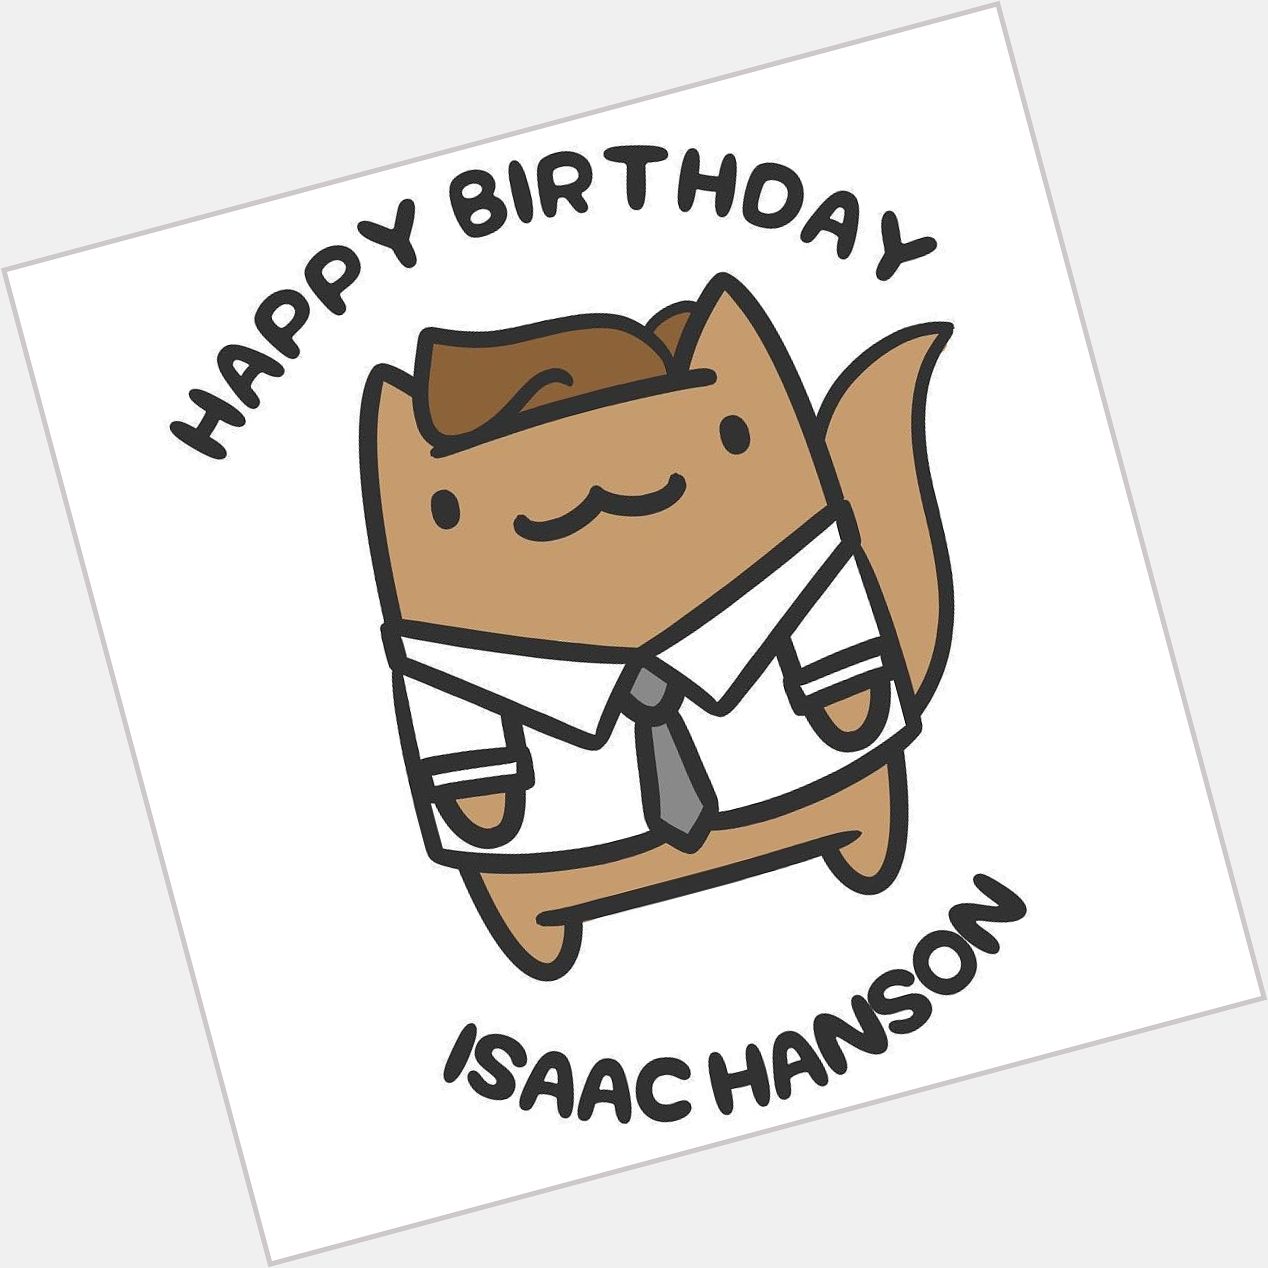 Happy Birthday, Isaac Hanson! Confession time: I\m a huge Hanson fan Like, my room was c 